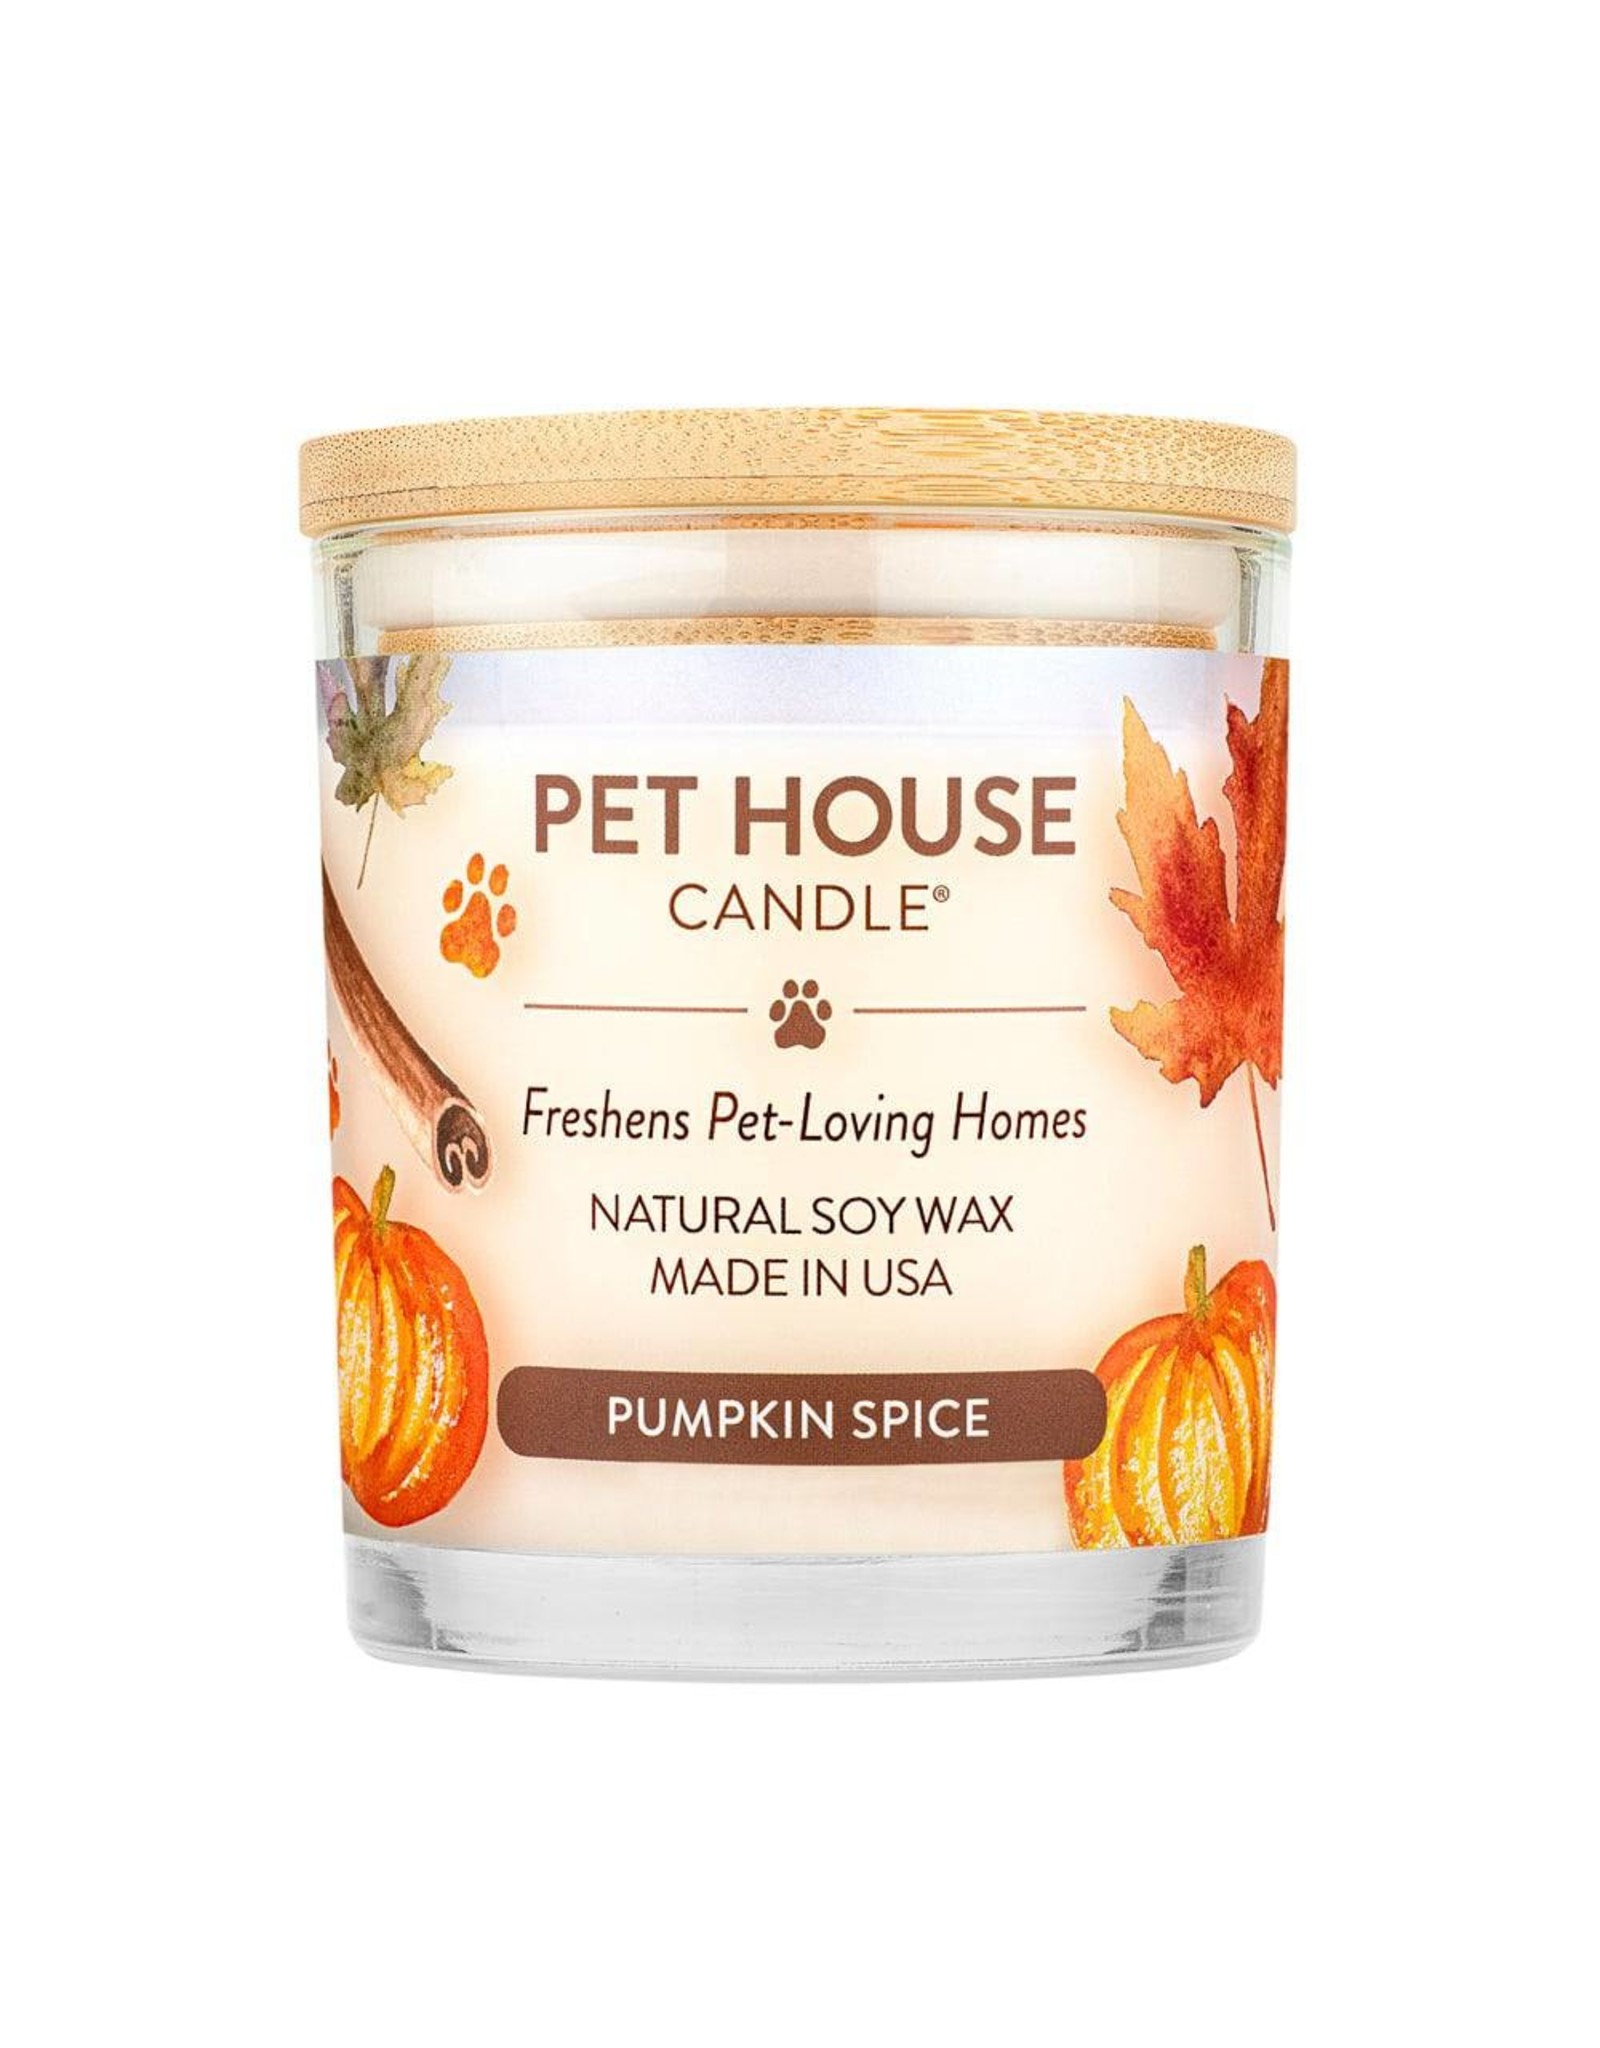 One Fur All Pet House Candles 8.5oz